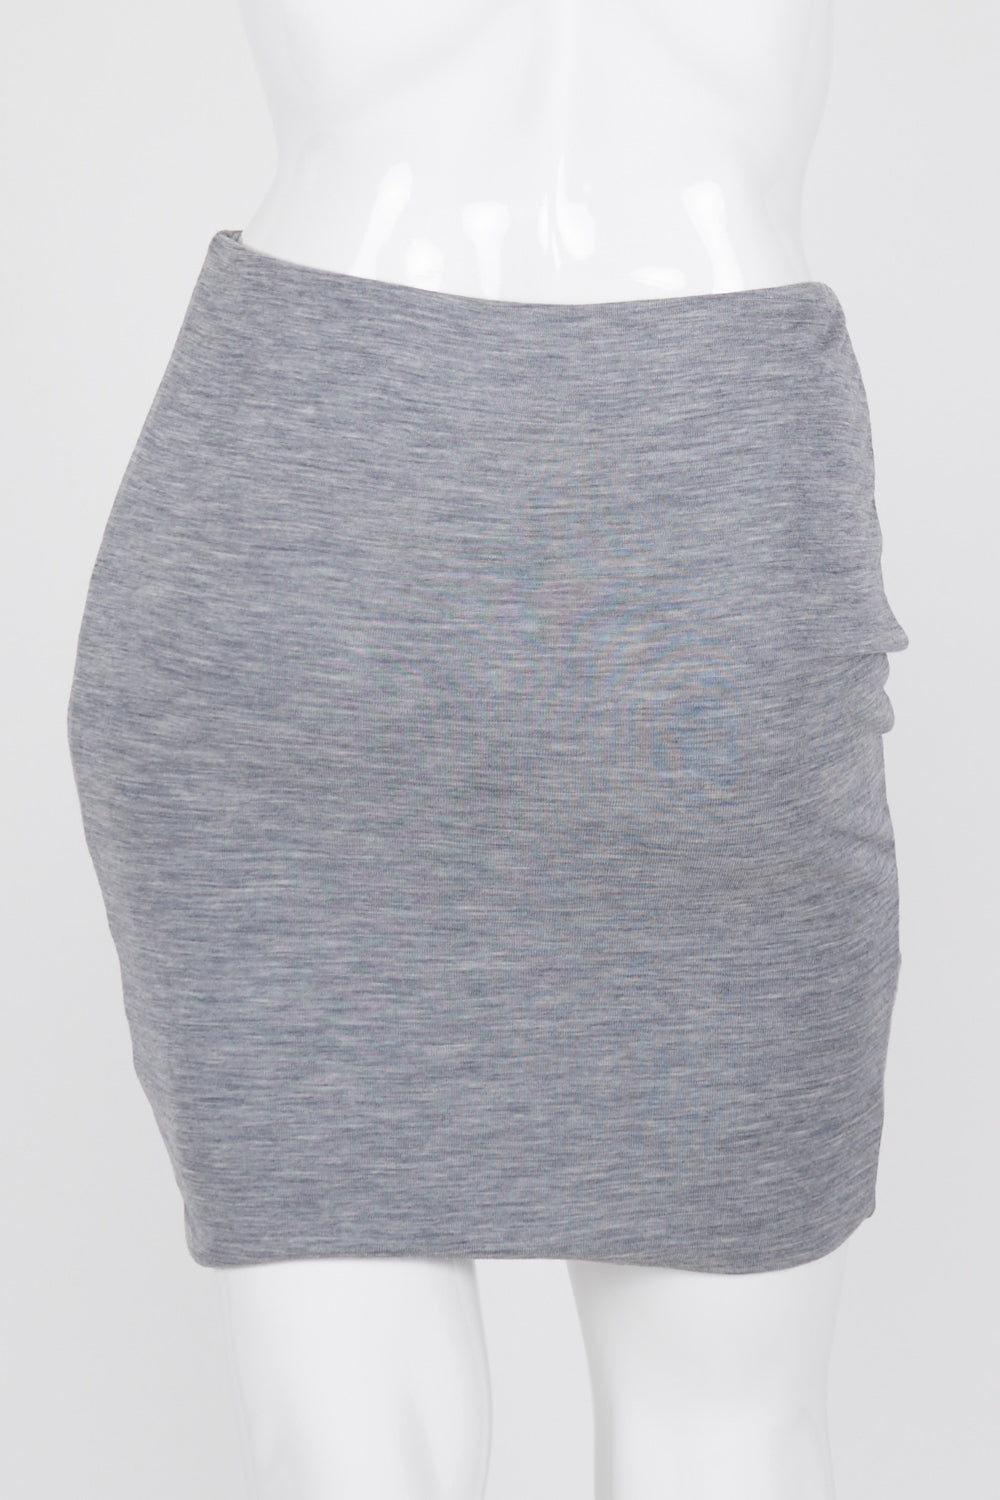 Skin And Threads Grey 100% Wool Skirt L